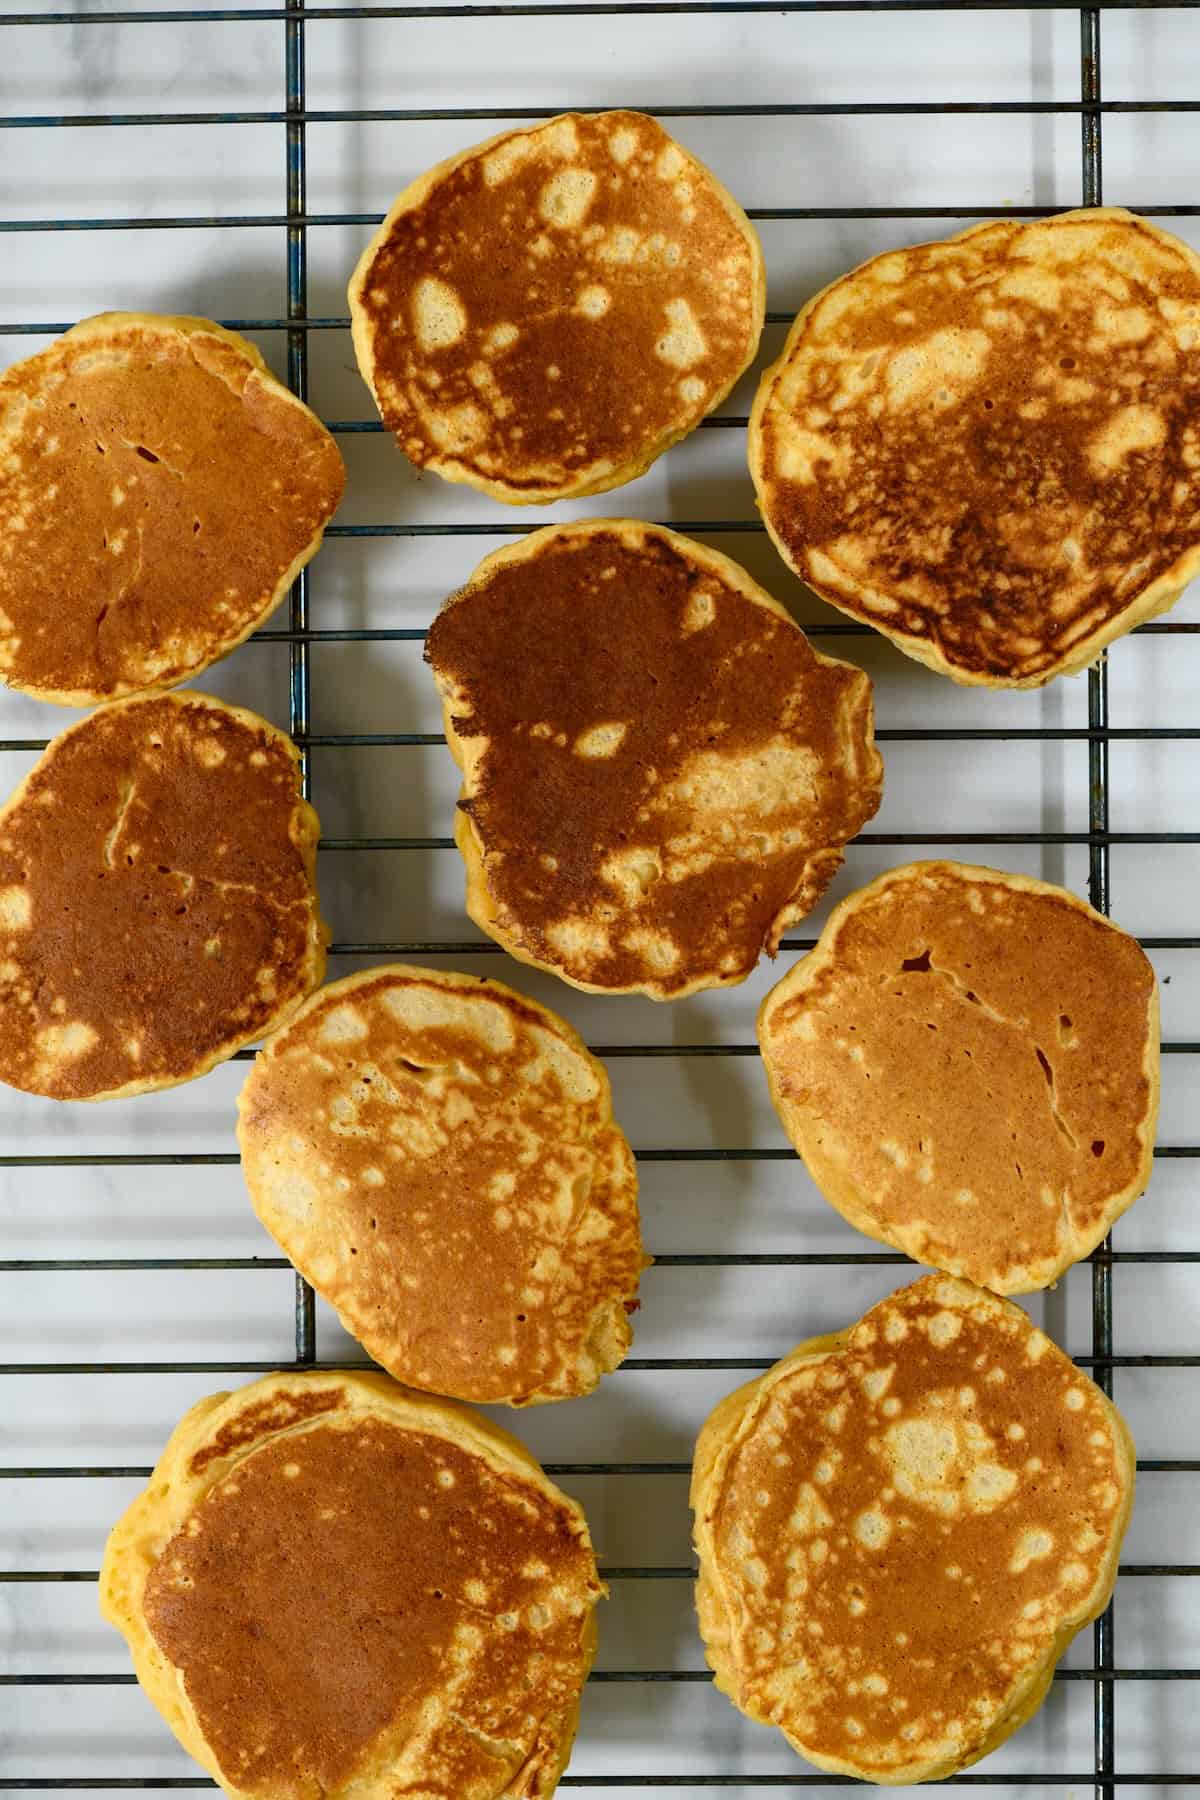 Nine ricotta pancakes resting on a grill